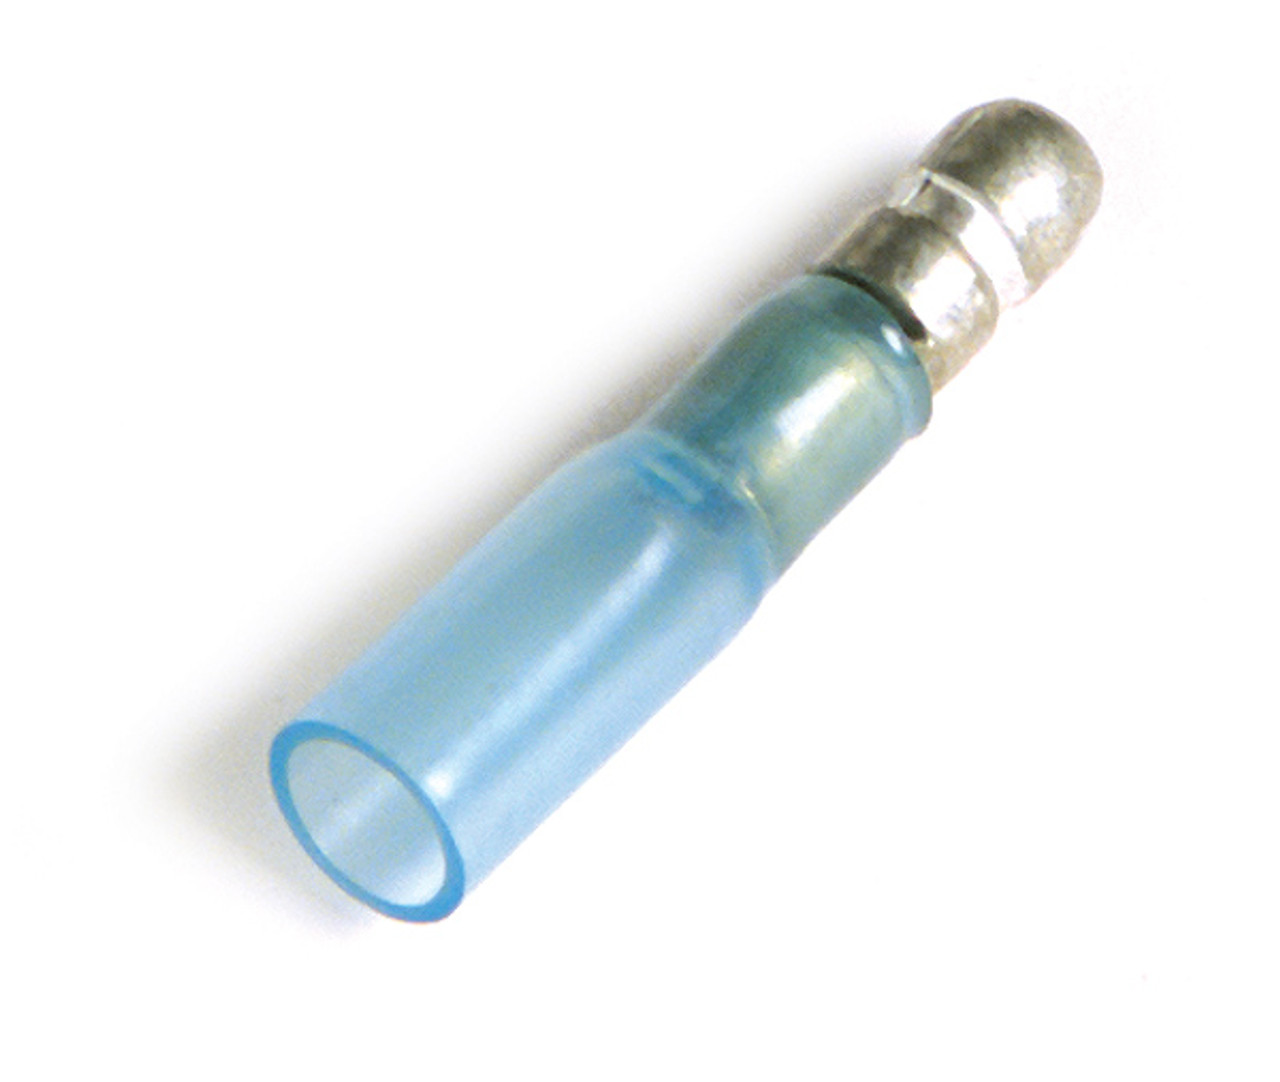 16 - 14 AWG Heat Shrinkable Bullet & Receptacle Connectors Male .157" @ 10 Pack - Blue  84-2431